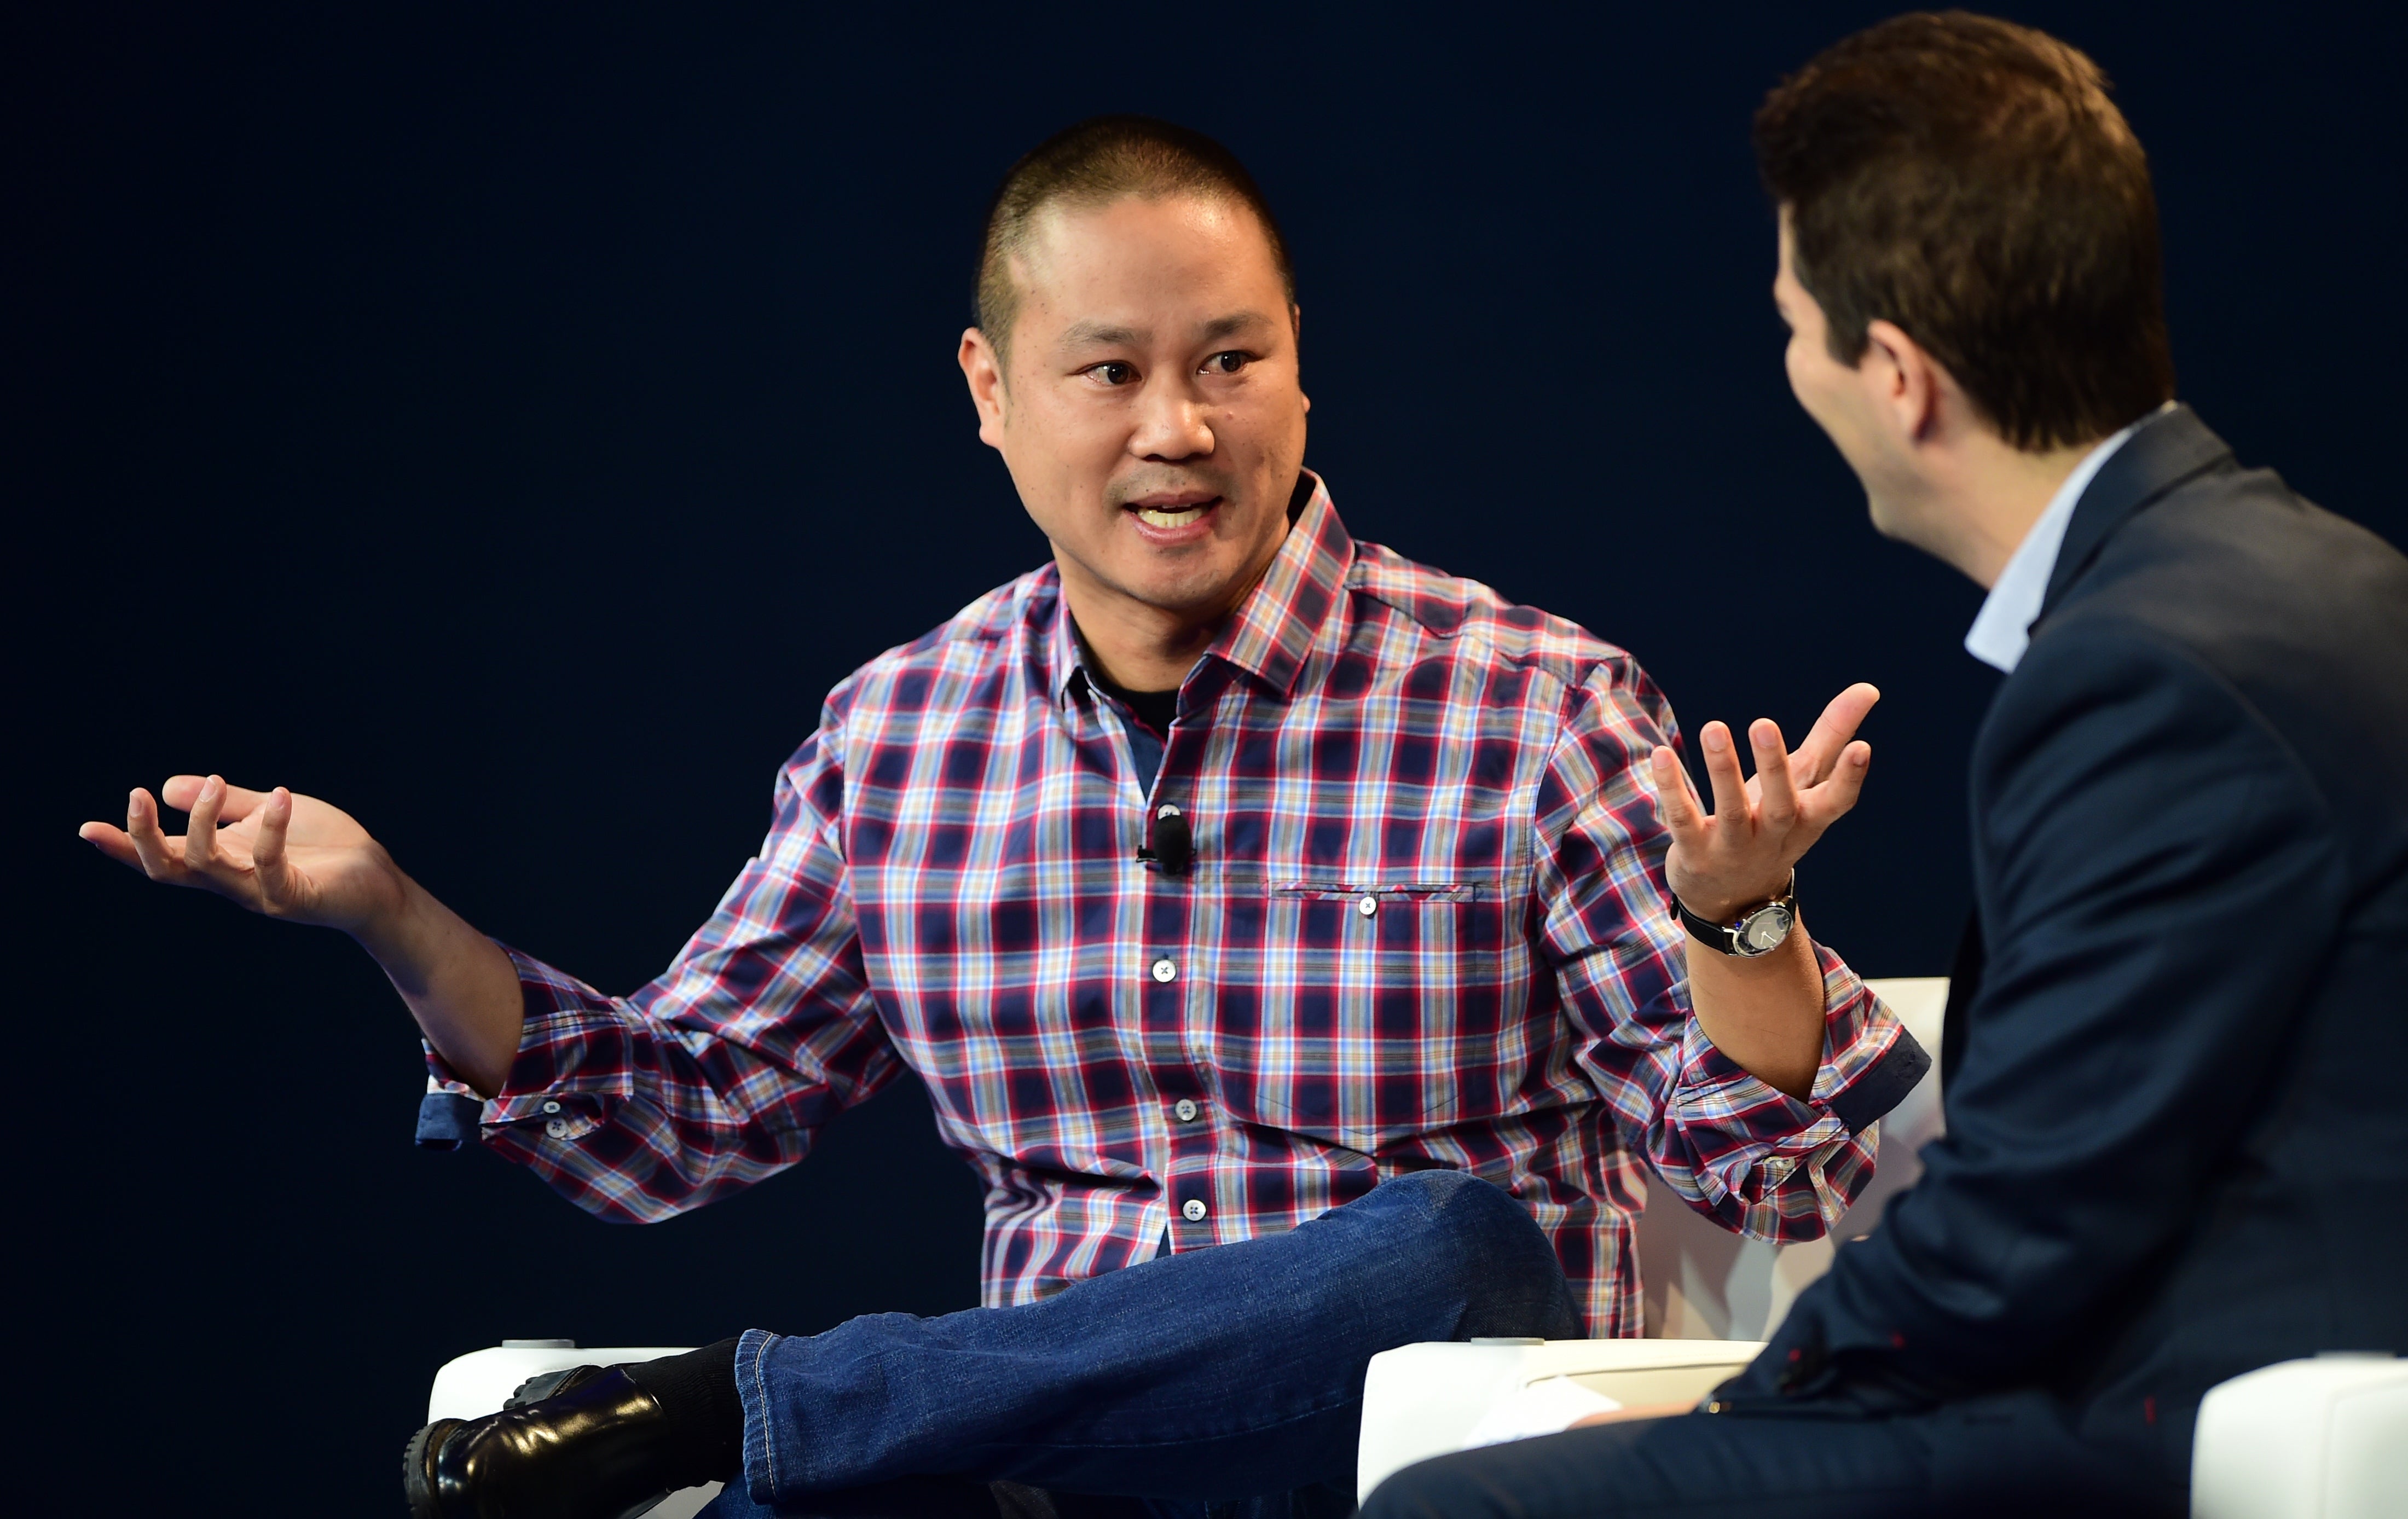 Zappos boss Tony Hsieh died from complications of smoke inhalation suffered during a house fire